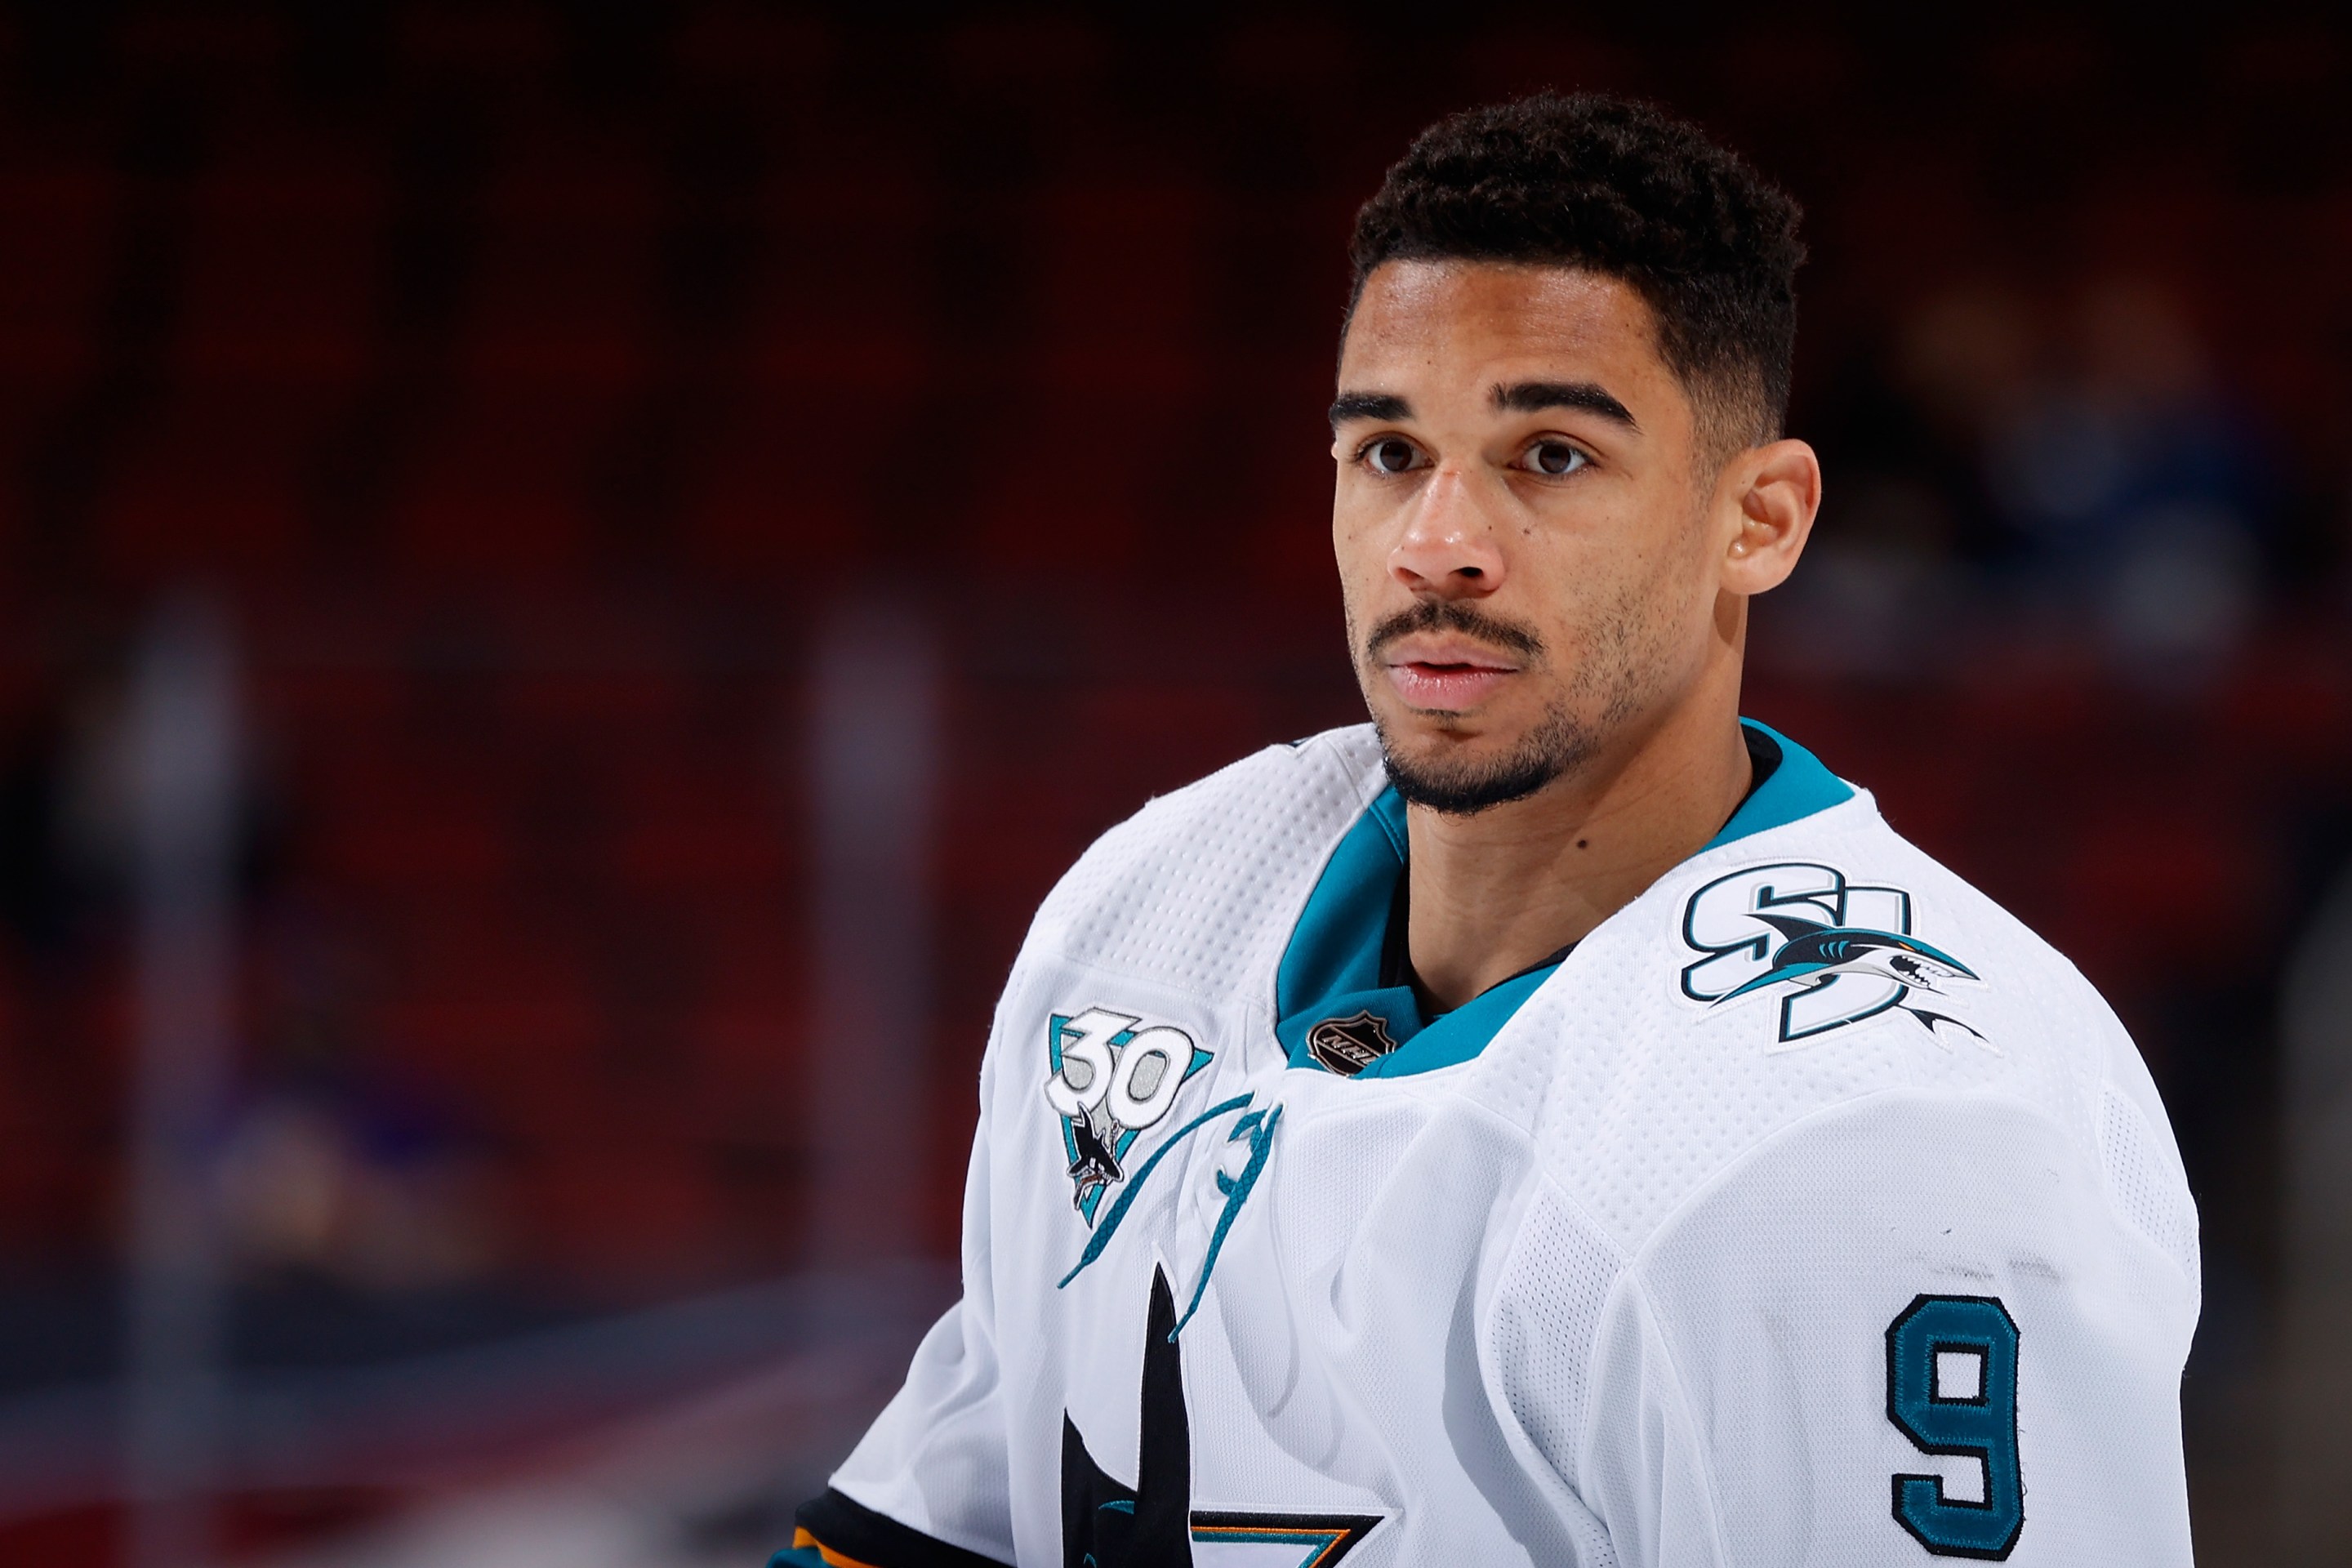 GLENDALE, ARIZONA - MARCH 27: Evander Kane #9 of the San Jose Sharks warms up during the NHL game against the Arizona Coyotes at Gila River Arena on March 27, 2021 in Glendale, Arizona. The Coyotes defeated the Sharks 4-0. (Photo by Christian Petersen/Getty Images)